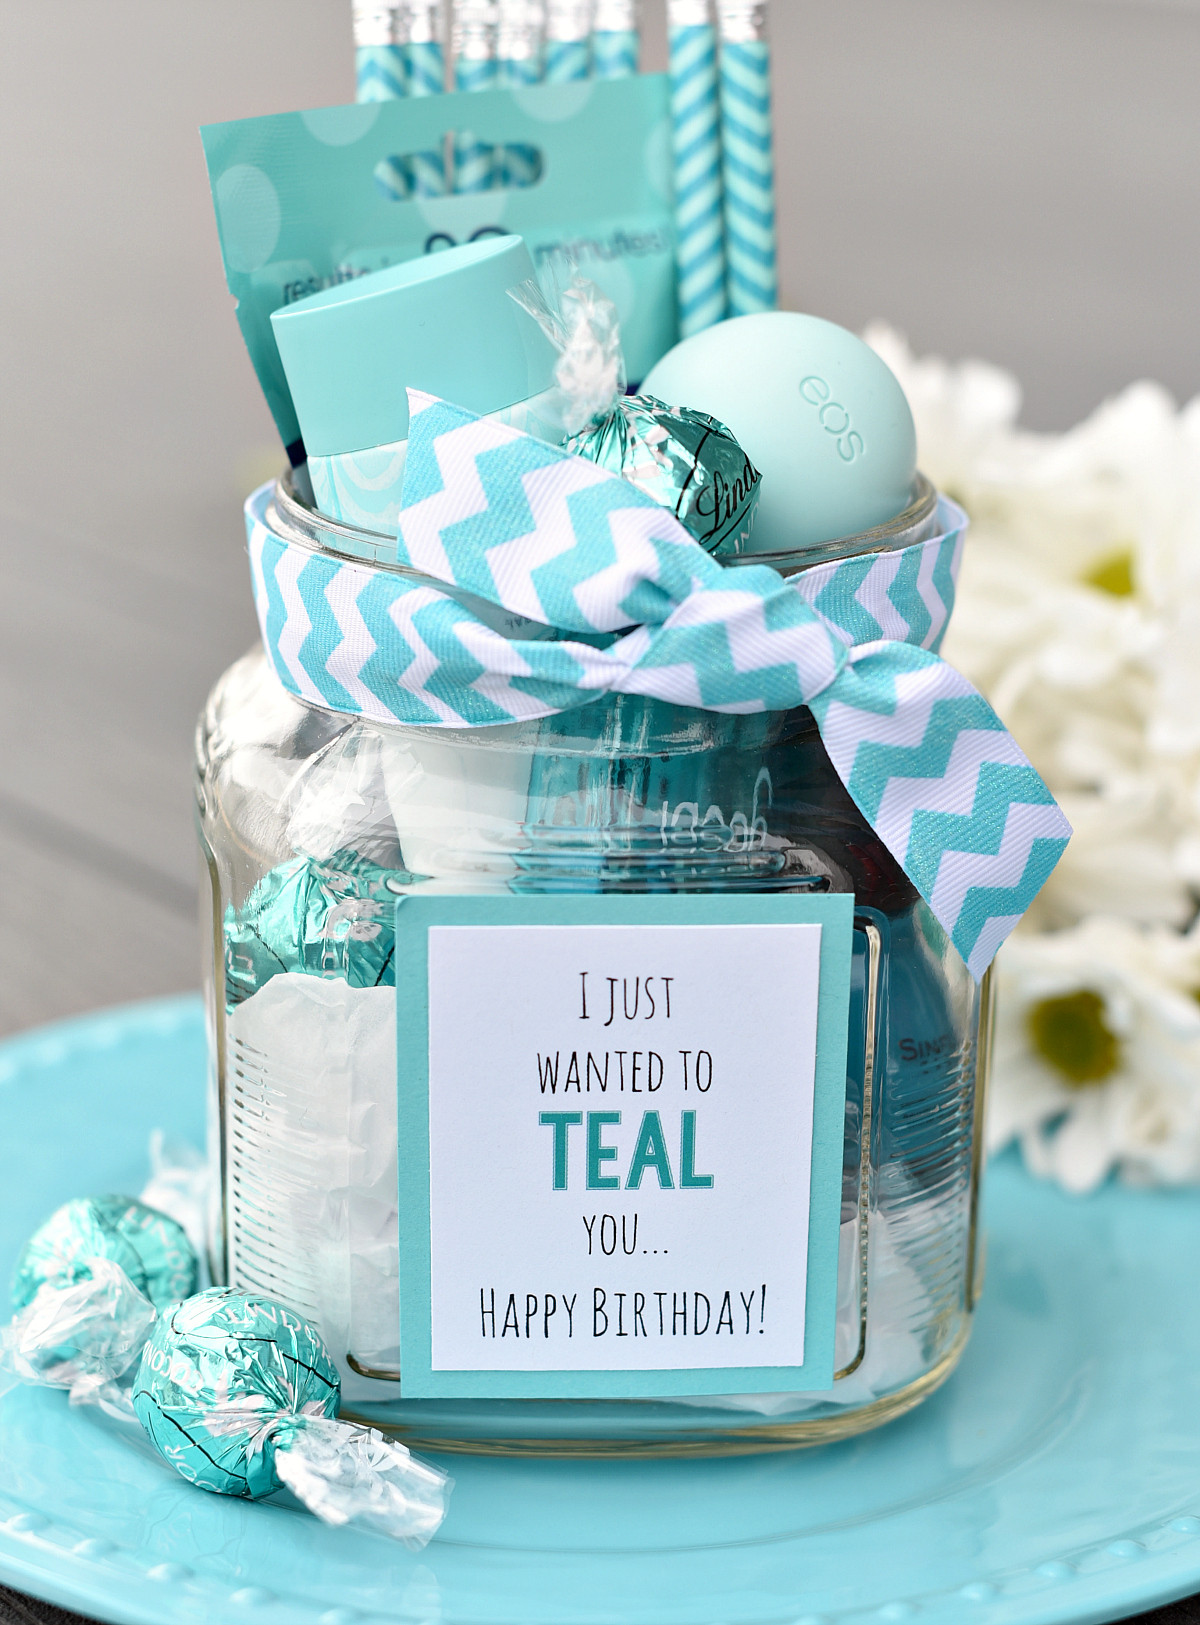 Simple Birthday Gift Ideas
 Teal Birthday Gift Idea for Friends – Fun Squared